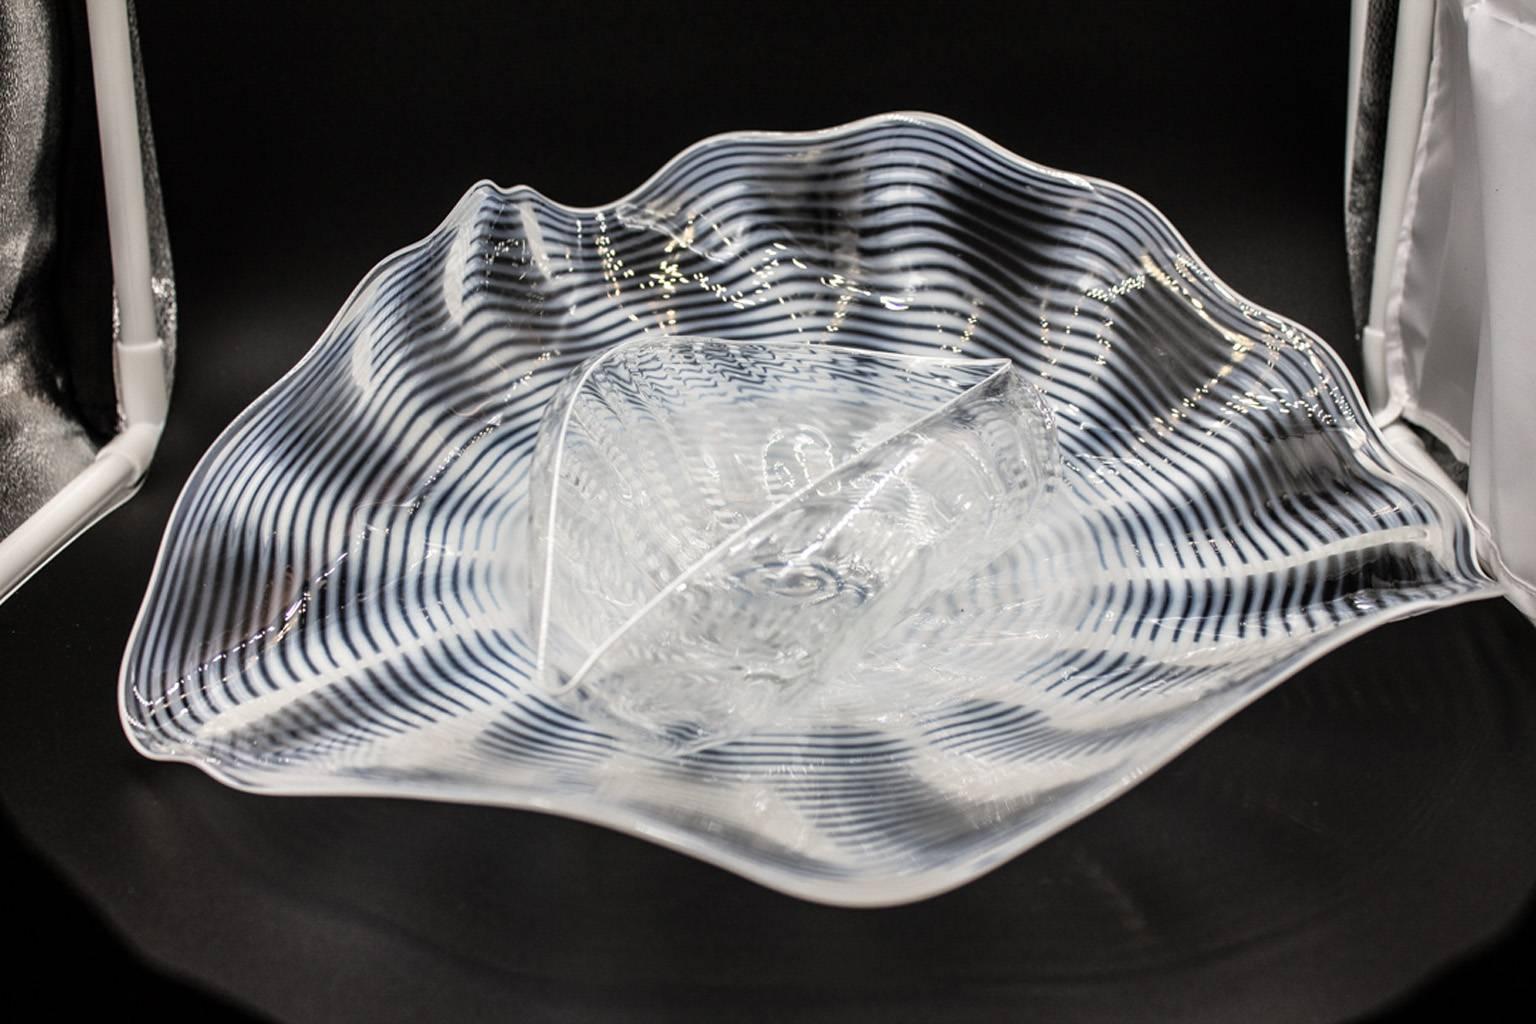 Two pieces by glass sculptor Dale Chihuly the larger of which is signed and dated 1984, seaform shapes clear glass with a white lip, the larger an 12 x 11 x 3" asymmetrical plate with ruffled and folded edge, and a spiral opaque white design,